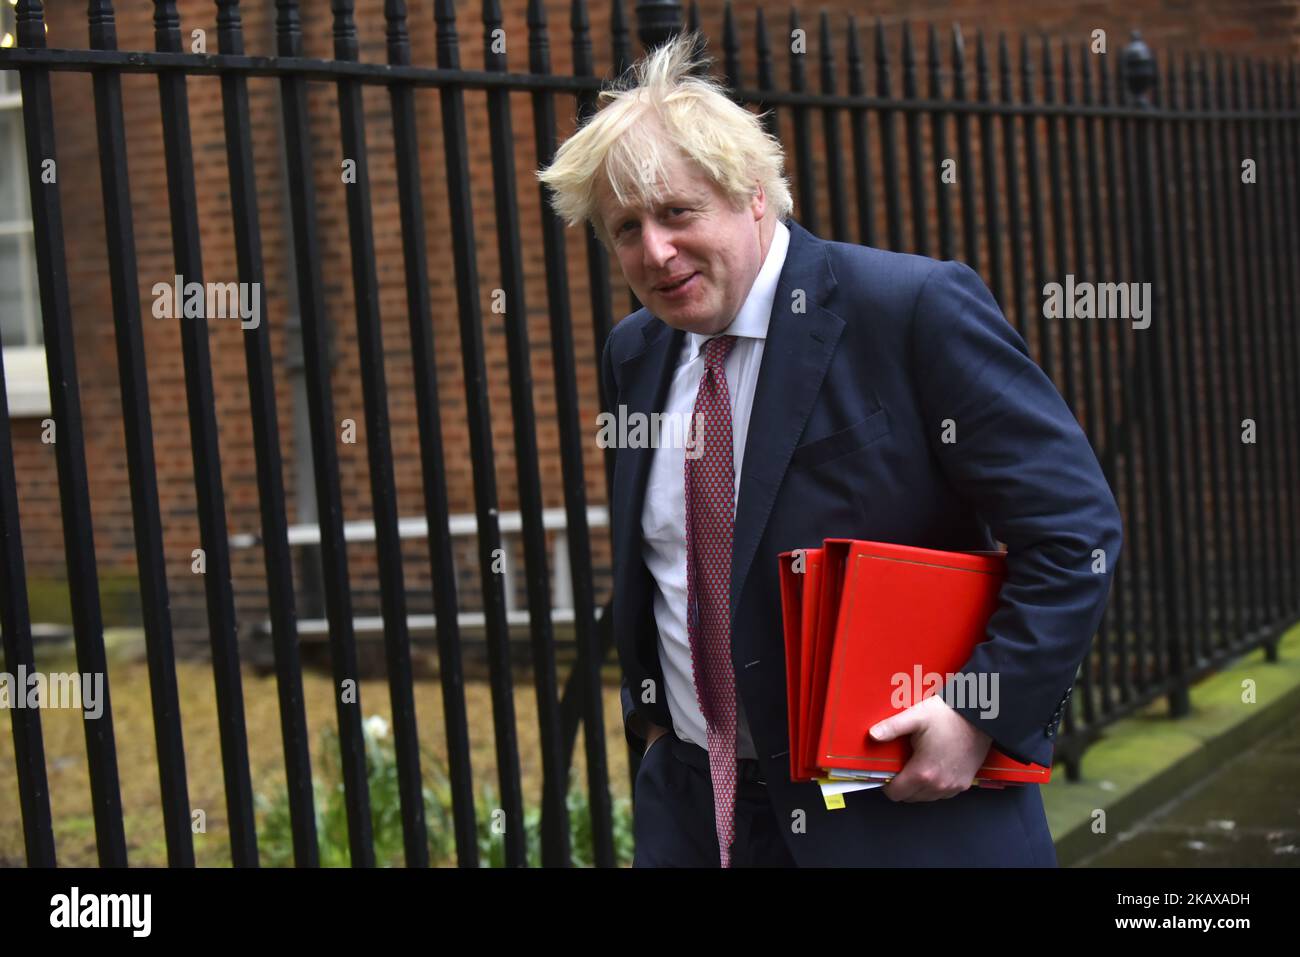 British Foreign Secretary Boris Johnson leaves 10 Downing Street after attending the weekly Cabinet Meeting, London on March 27, 2018. Prime Minister Theresa May is facing another Brexit hurdle after the opposition Labour Party announced its pushing for a legal commitment to avoid a hard border with Ireland after Britain leaves the European Union. The Migration Advisory Committee (MAC) said businesses are concerned about their ability to recruit workers from the EU after Britain leaves the EU. UK employers also see EU workers as 'more reliable' and eager than their British counterparts, the re Stock Photo